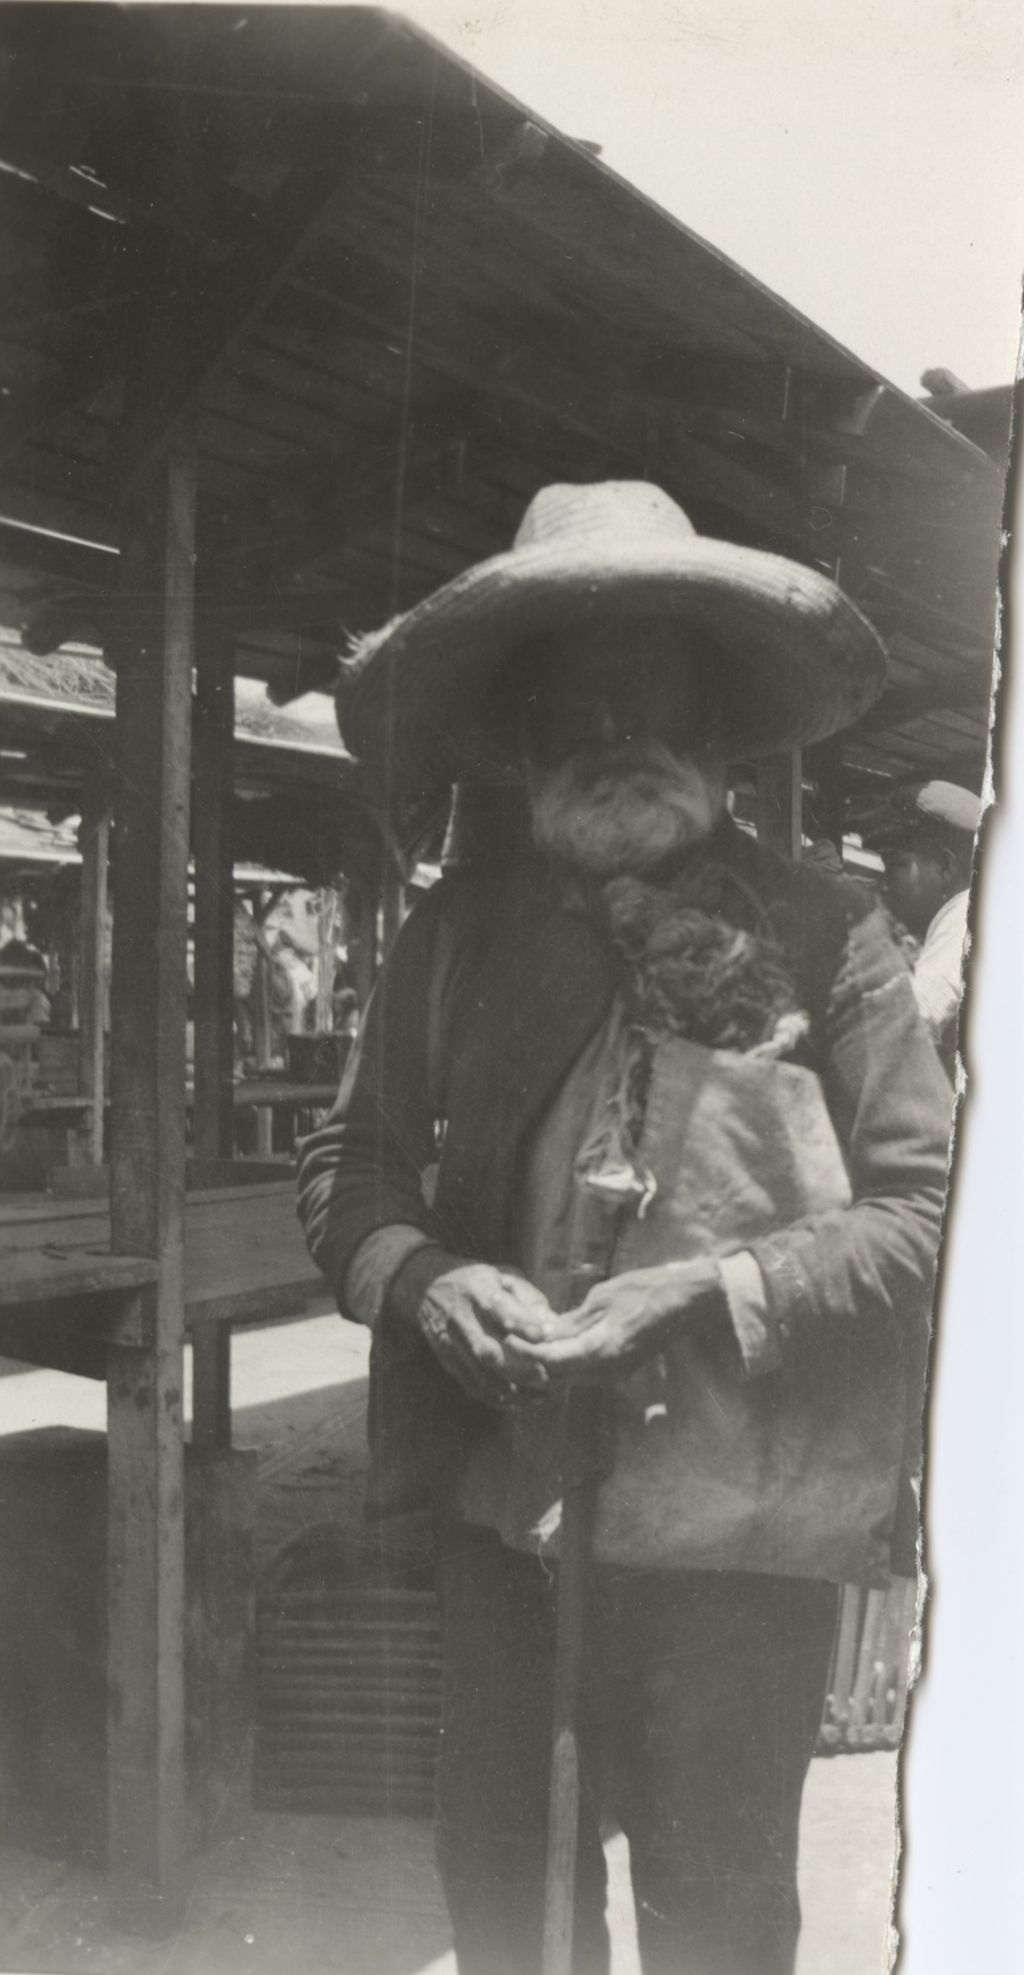 Miniature of Man photographed on Jane Addams' trip to Mexico